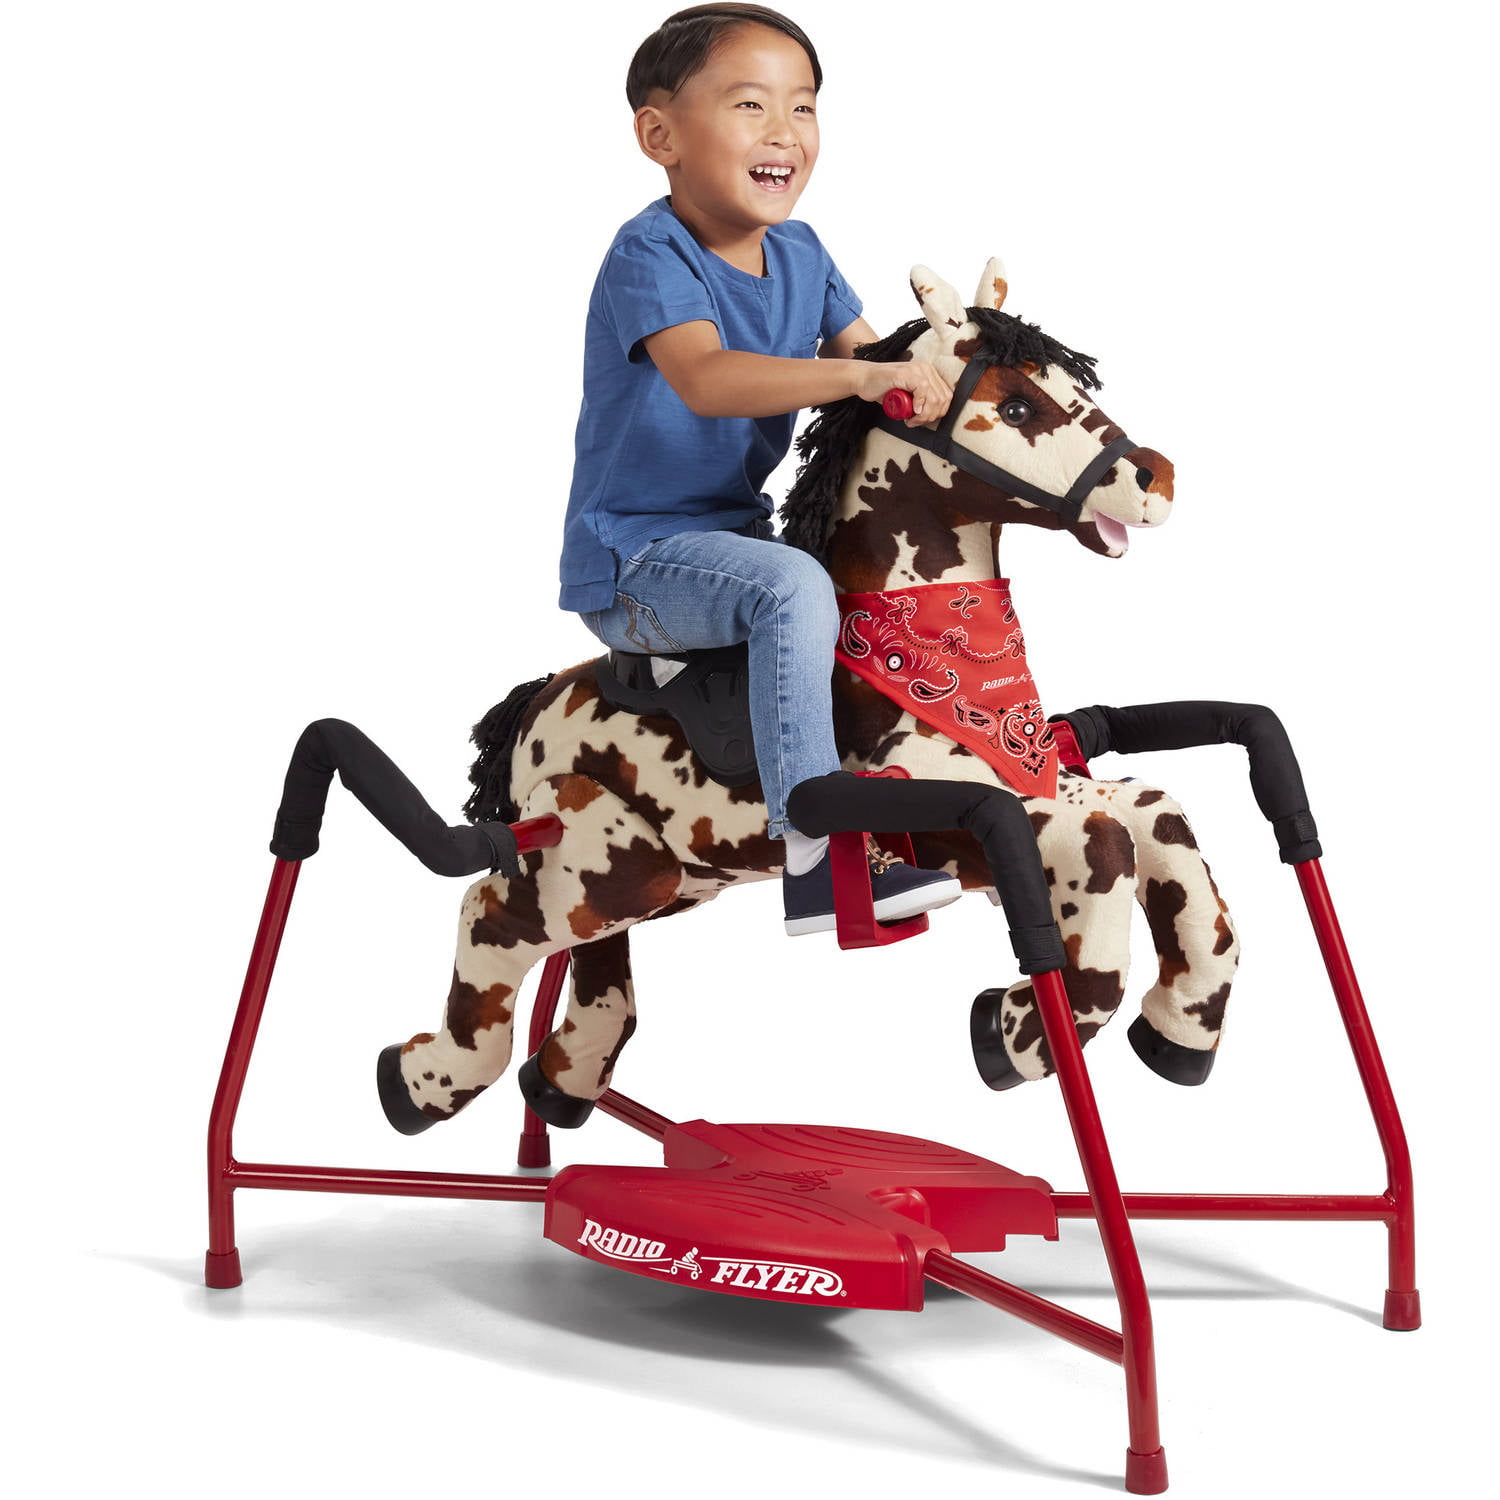 Radio Flyer, Freckles Interactive Spring Horse, Ride-on for Boys and Girls, for Kids 2 - 6 years old - image 3 of 18